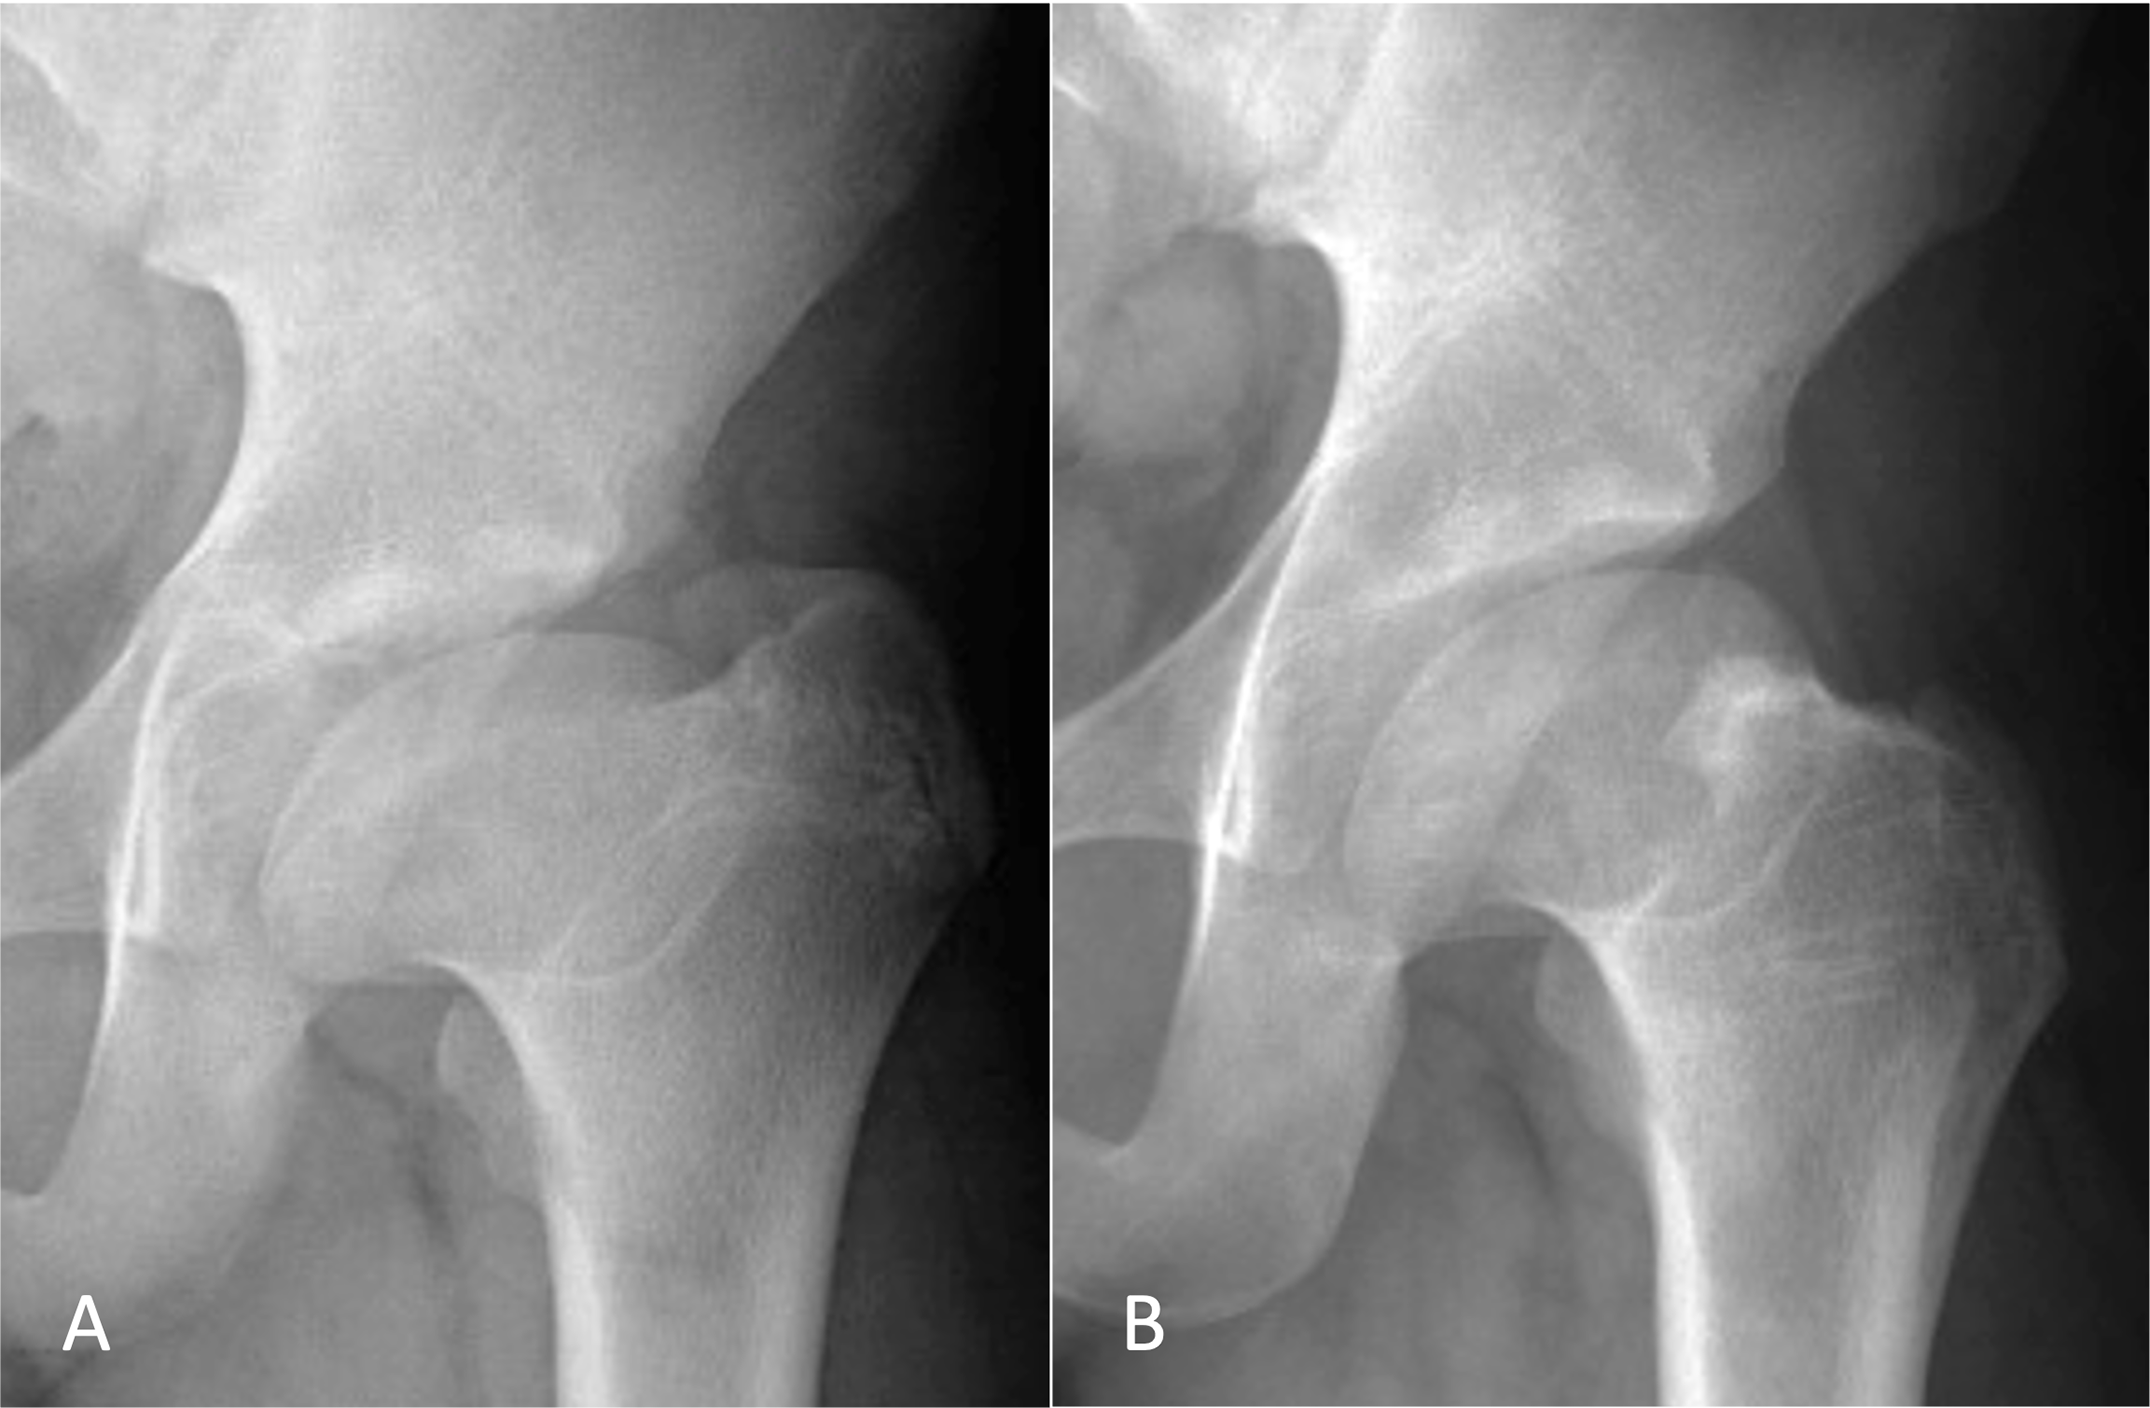 Preoperative and postoperative anteroposterior radiographs of the left hip of a 14-year-old male patient who was diagnosed with Legg-Calvé-Perthes disease at 10 years of age.